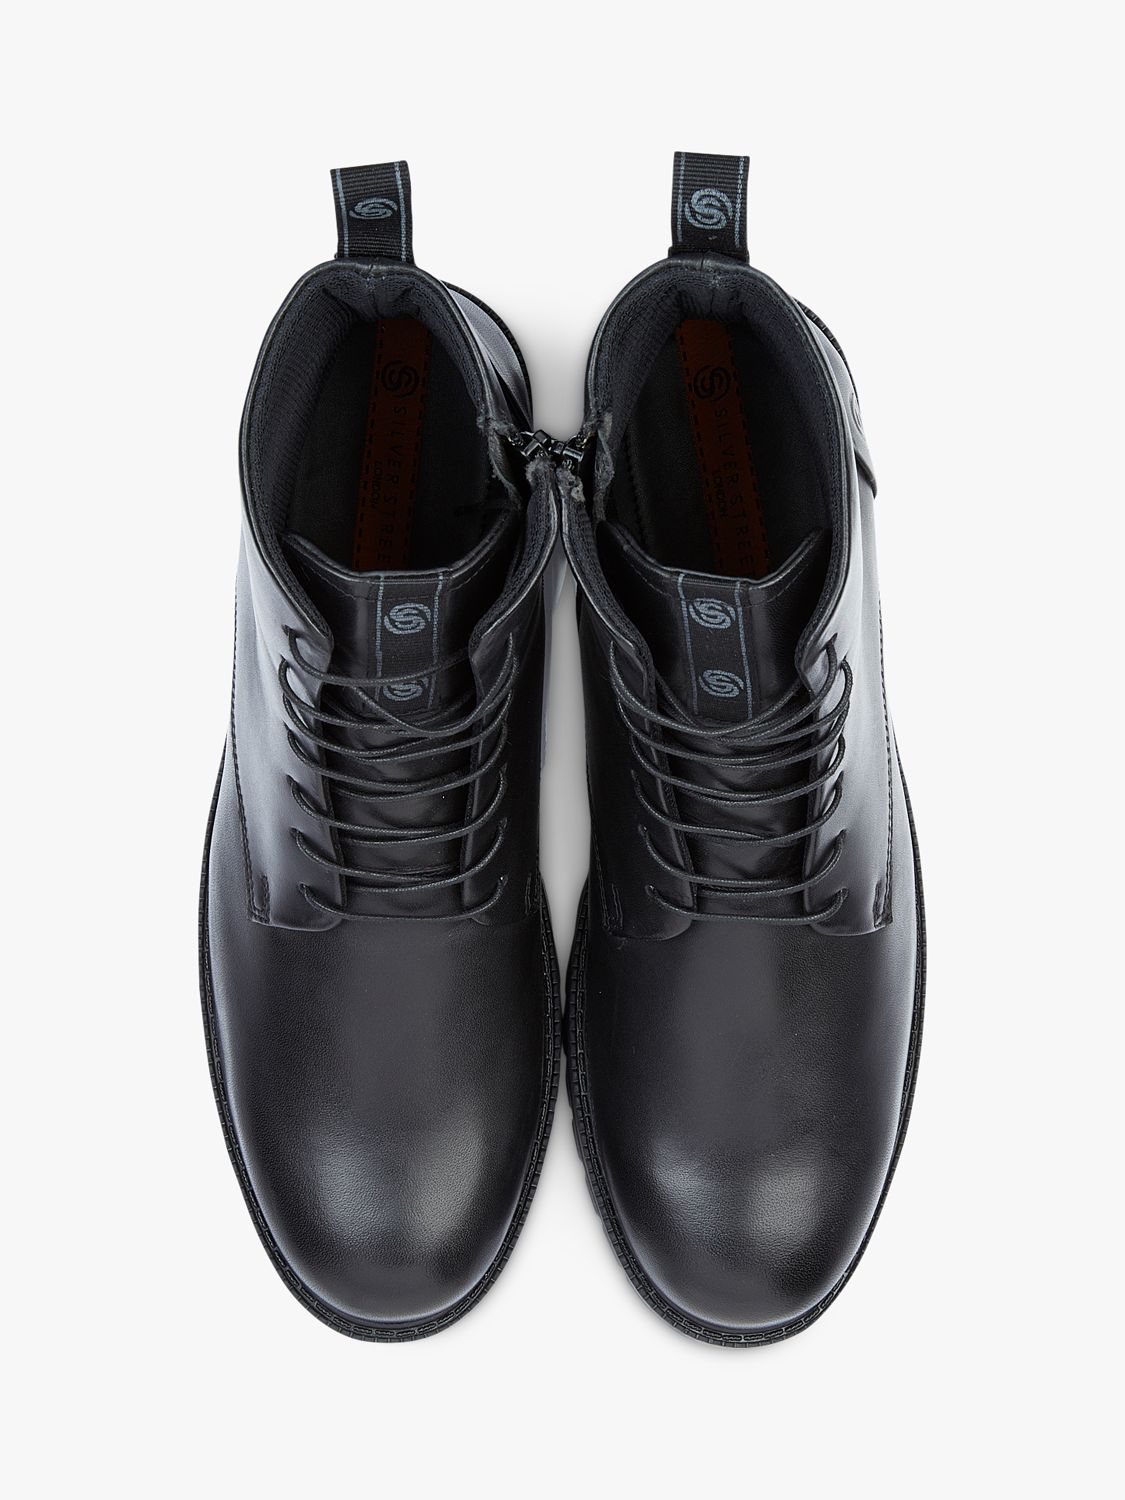 Buy Silver Street London Farringdon Leather Lace Up Boots, Black Online at johnlewis.com